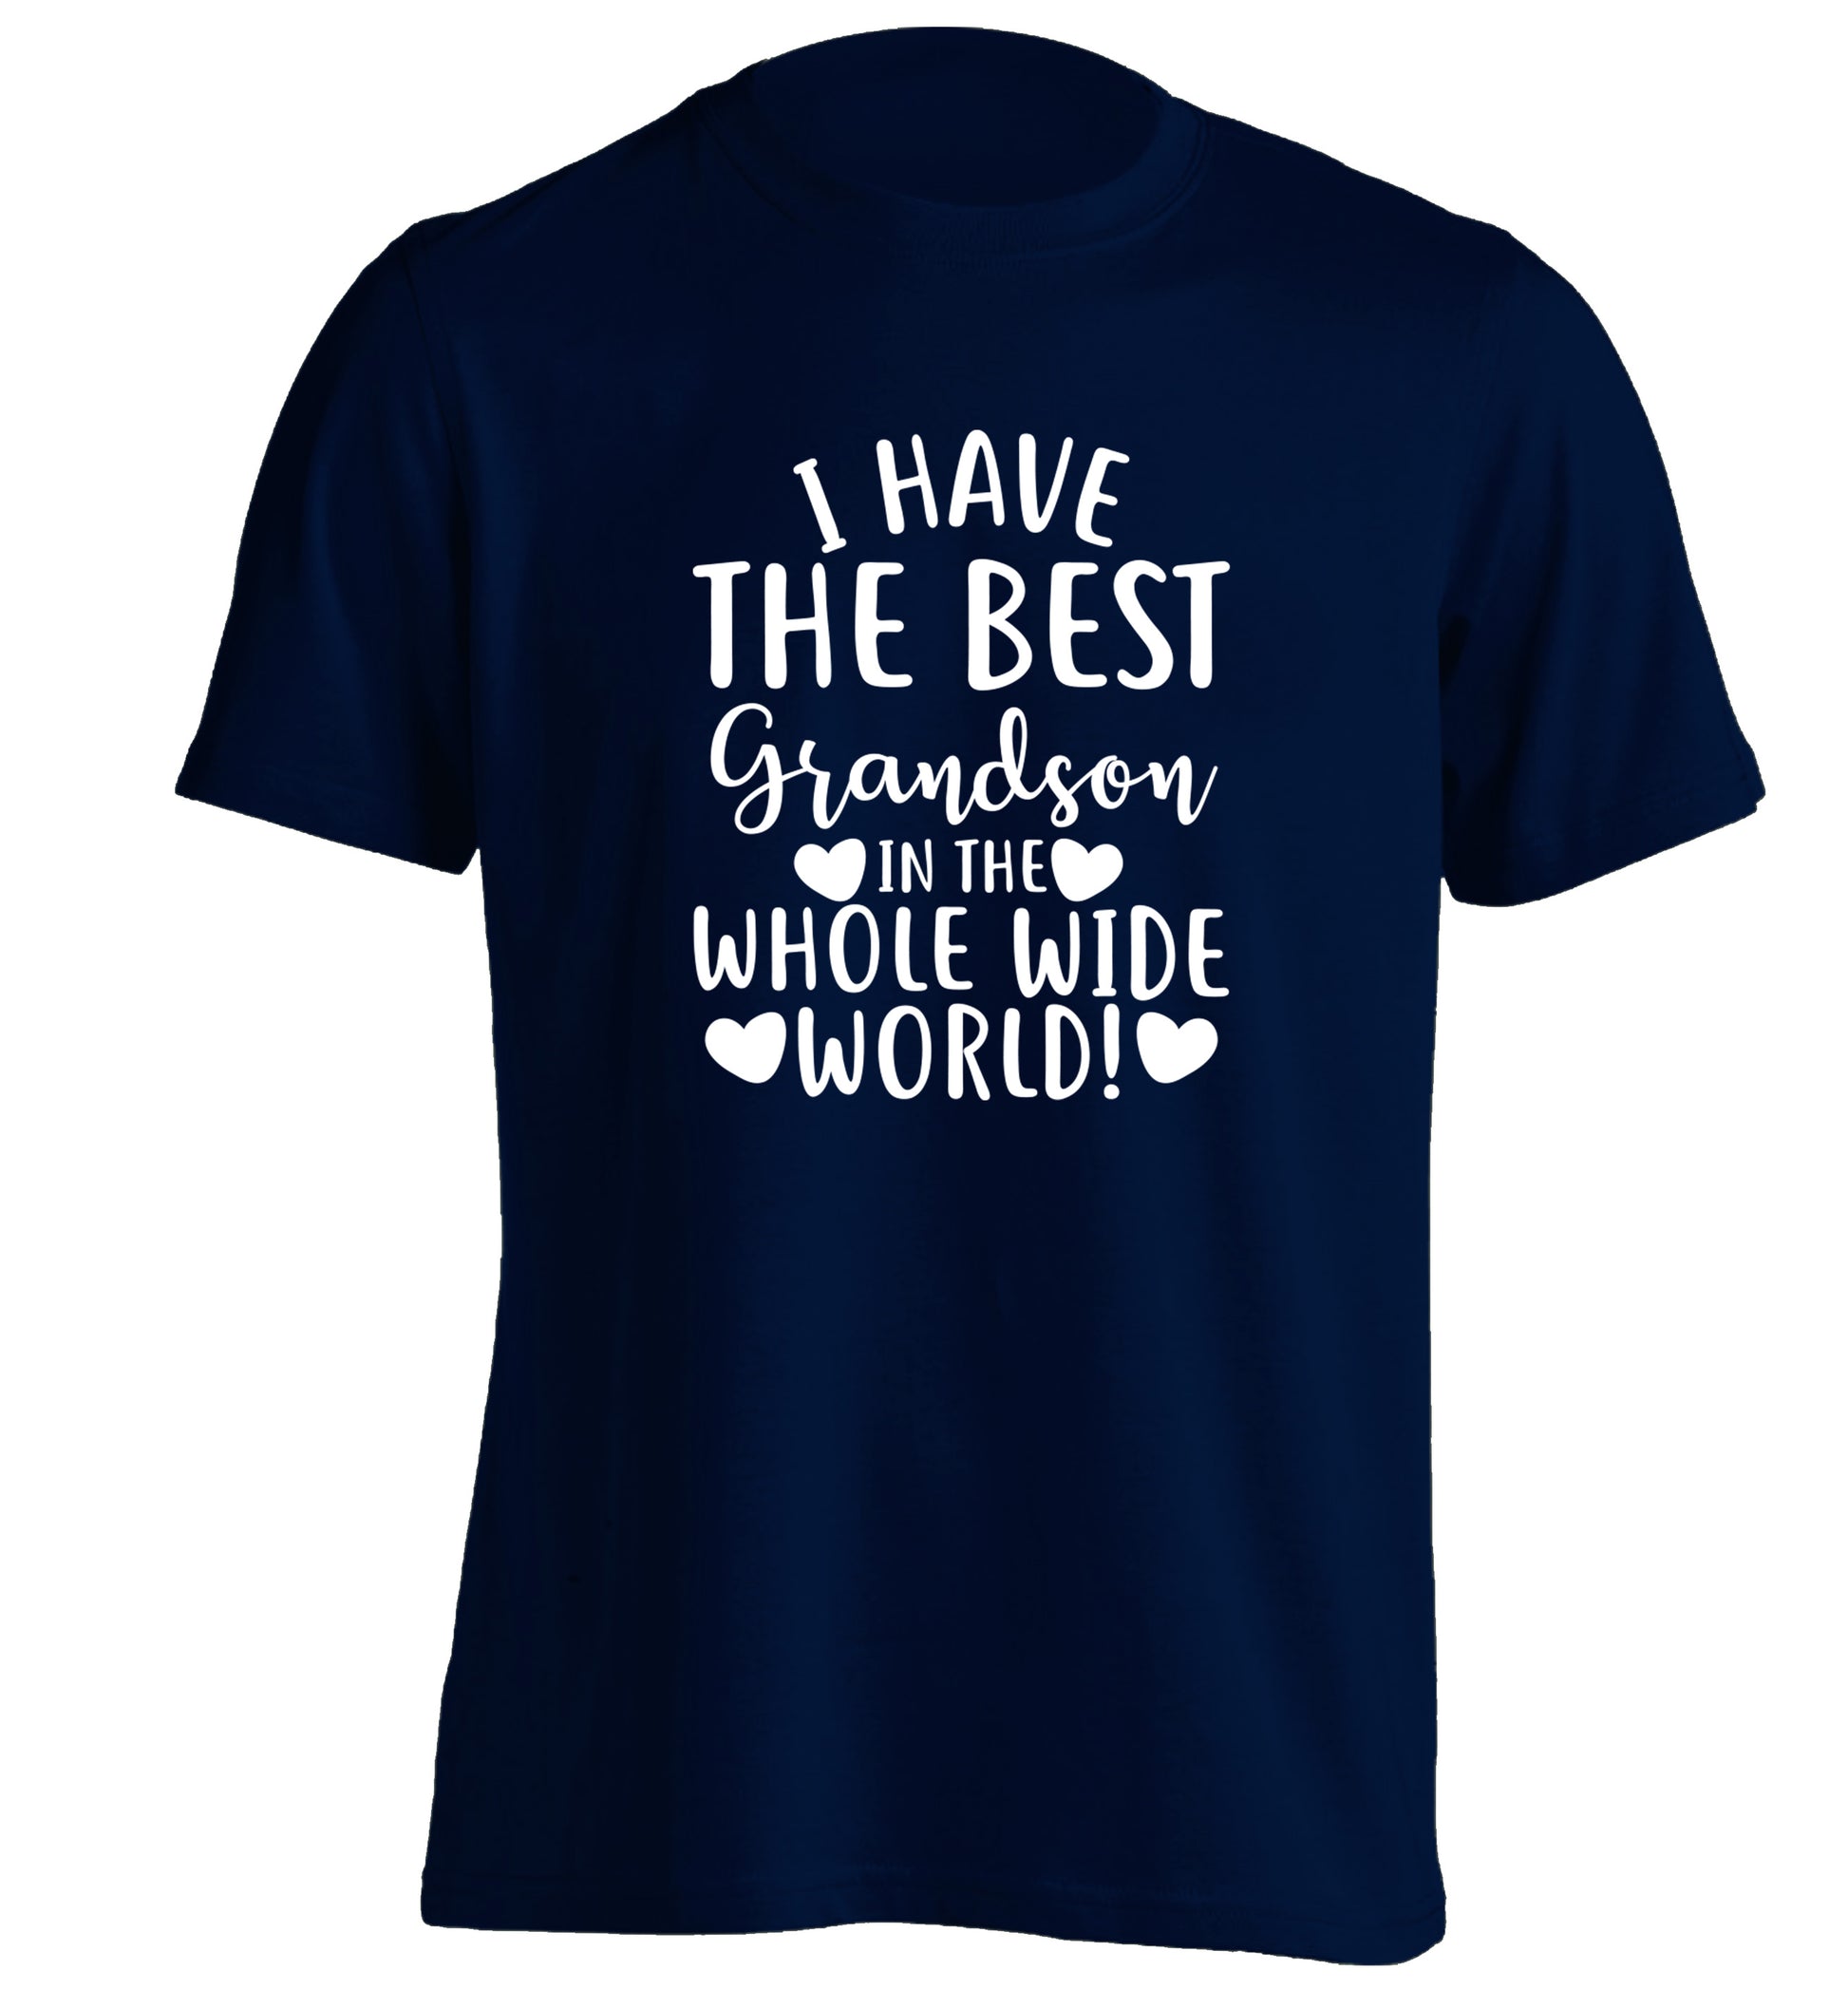 I have the best grandson in the whole wide world! adults unisex navy Tshirt 2XL